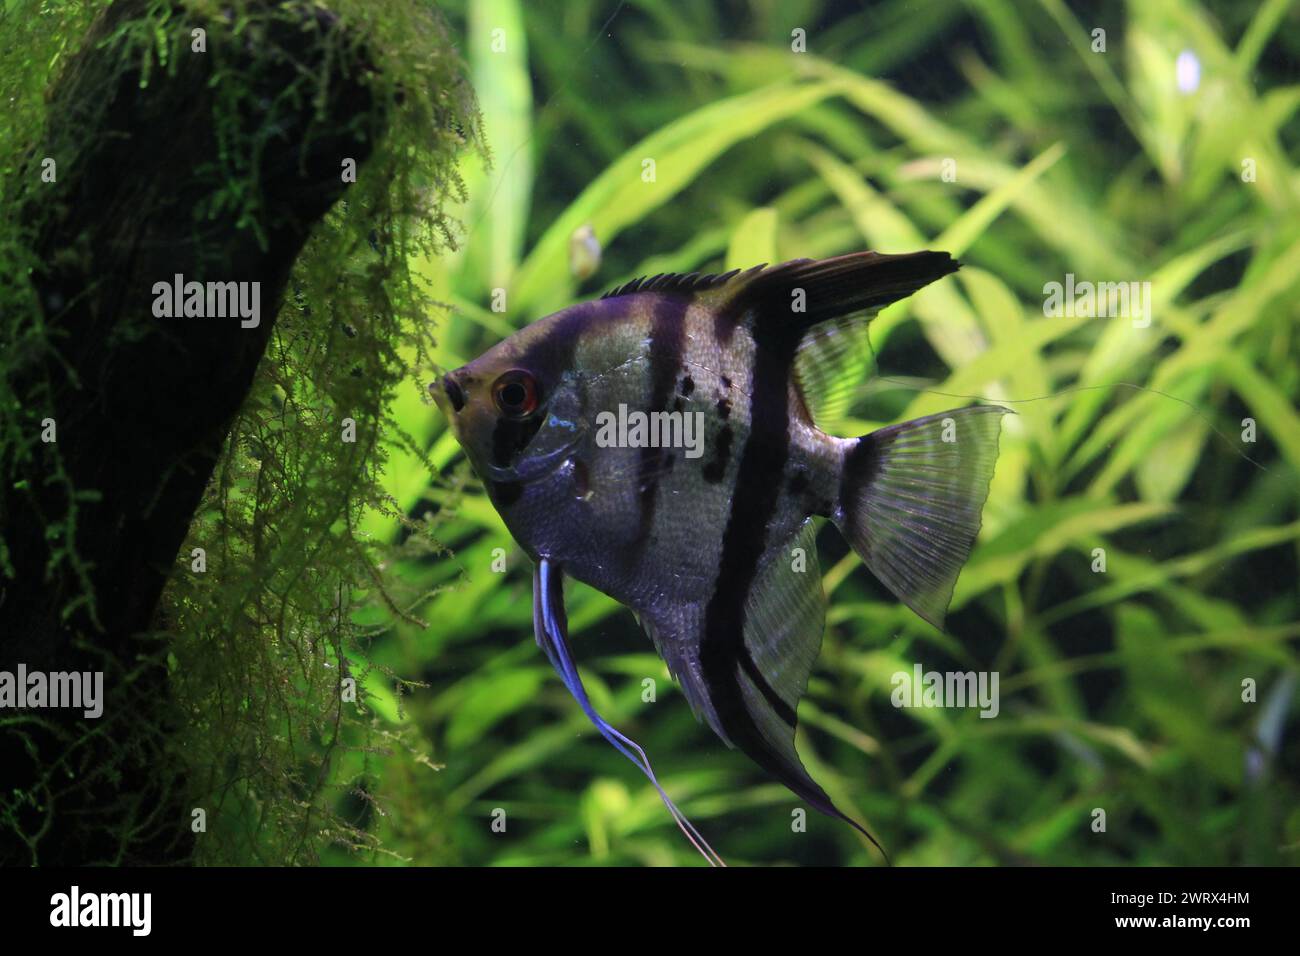 Angelfish (Pterophyllum scalare) in aquarium. Freshwater fish species are commonly found in captivity. Stock Photo